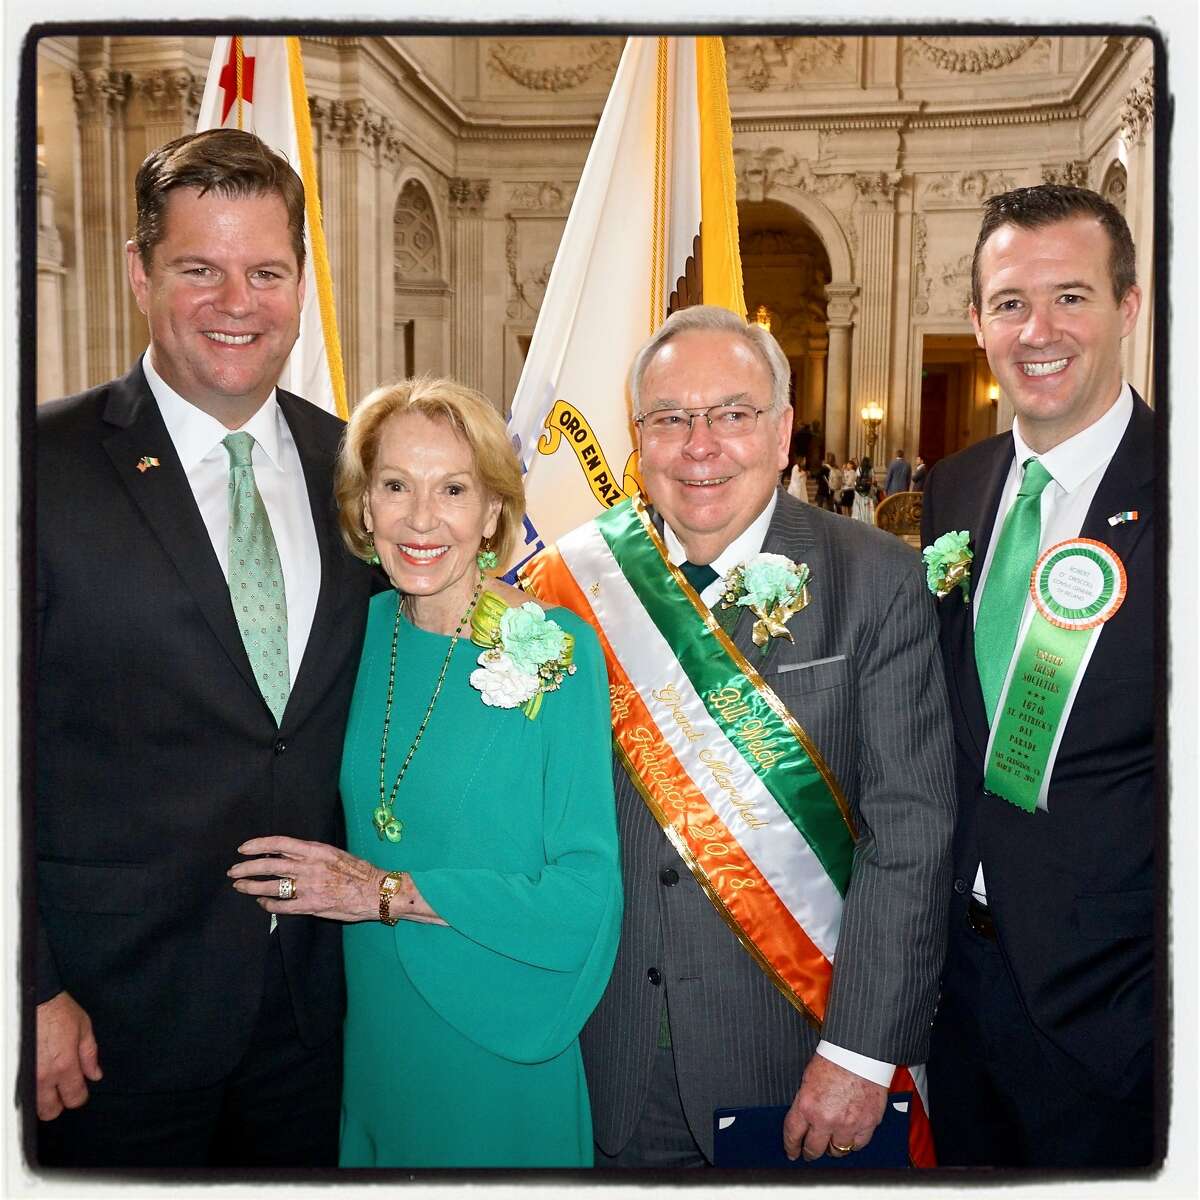 Acting Mayor Mark Farrell (left), Protocol Chief Charlotte Shultz, St. Patrick's Day Parade Grand Marshall Bill Welch and Irish Consul General Robert O'Driscoll at City Hall. March 9, 2018.